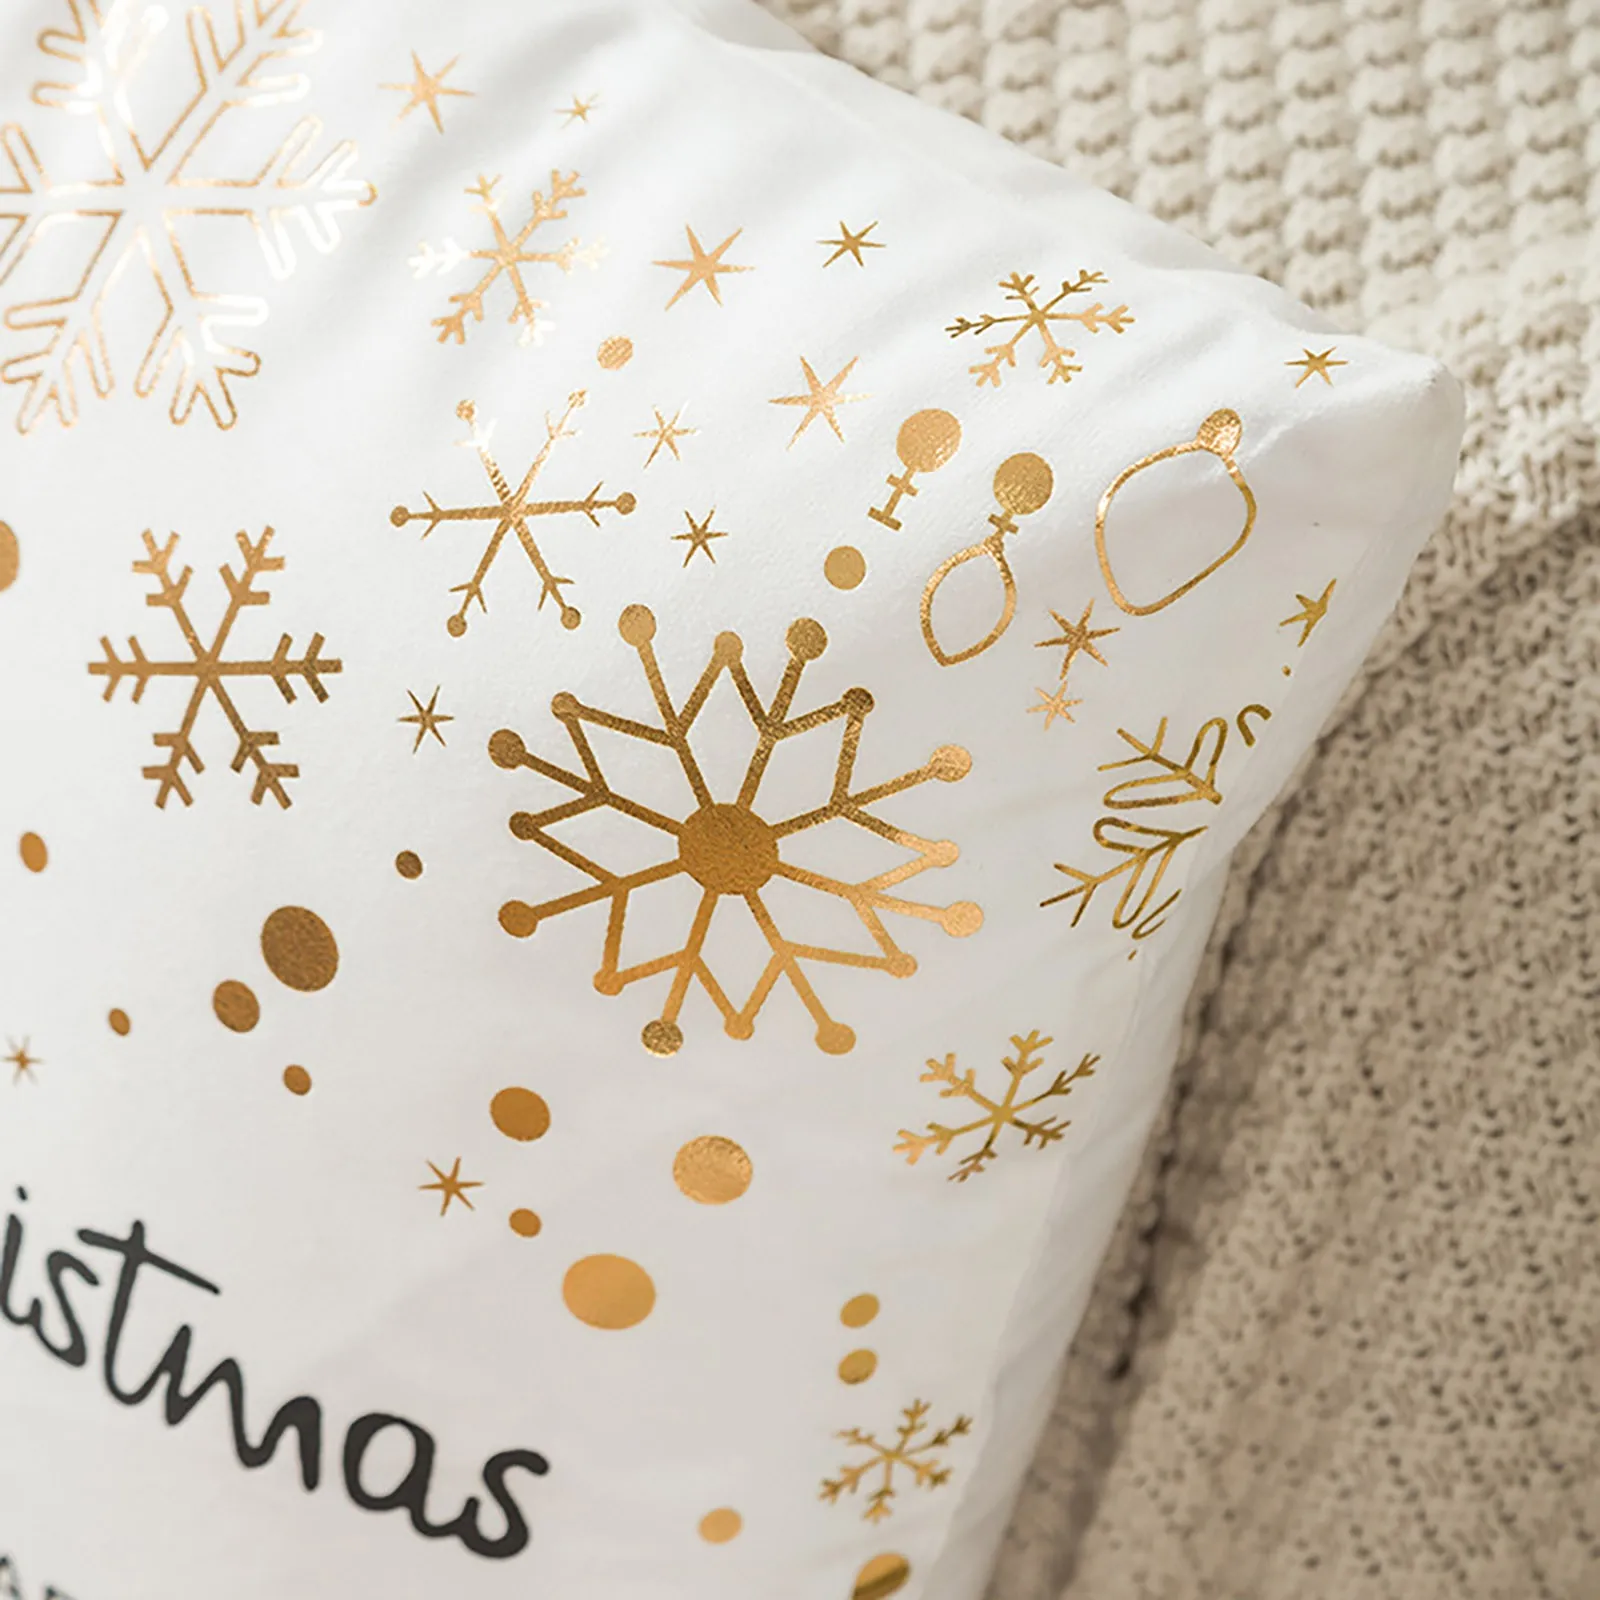 https://ae01.alicdn.com/kf/S6d128d5a11aa4e1397611b6021ec1f20d/Toddler-Pillowcase-14x19-Toddler-Pillowcase-13-X-18-Girl-Christmas-Couch-Pillows-for-Living-Room-Set.jpg